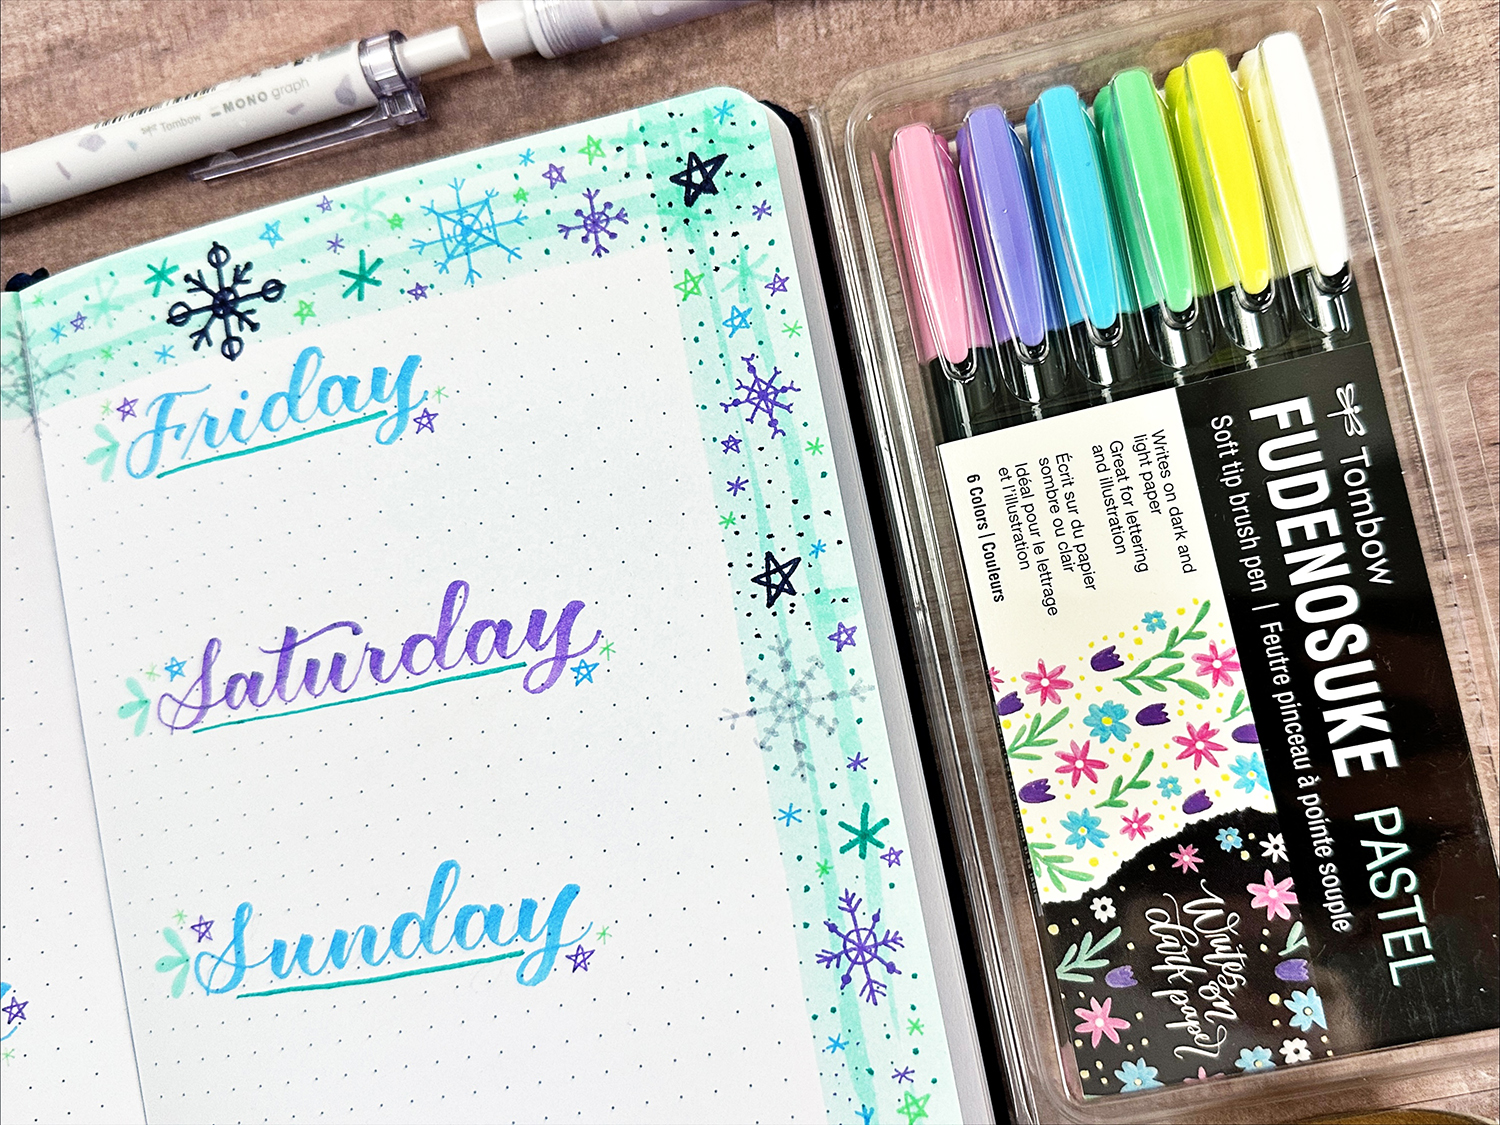 The Tombow Fudenosuke Brush Pen is perfect for lettering, but also great for doodling! #tombow #journaling